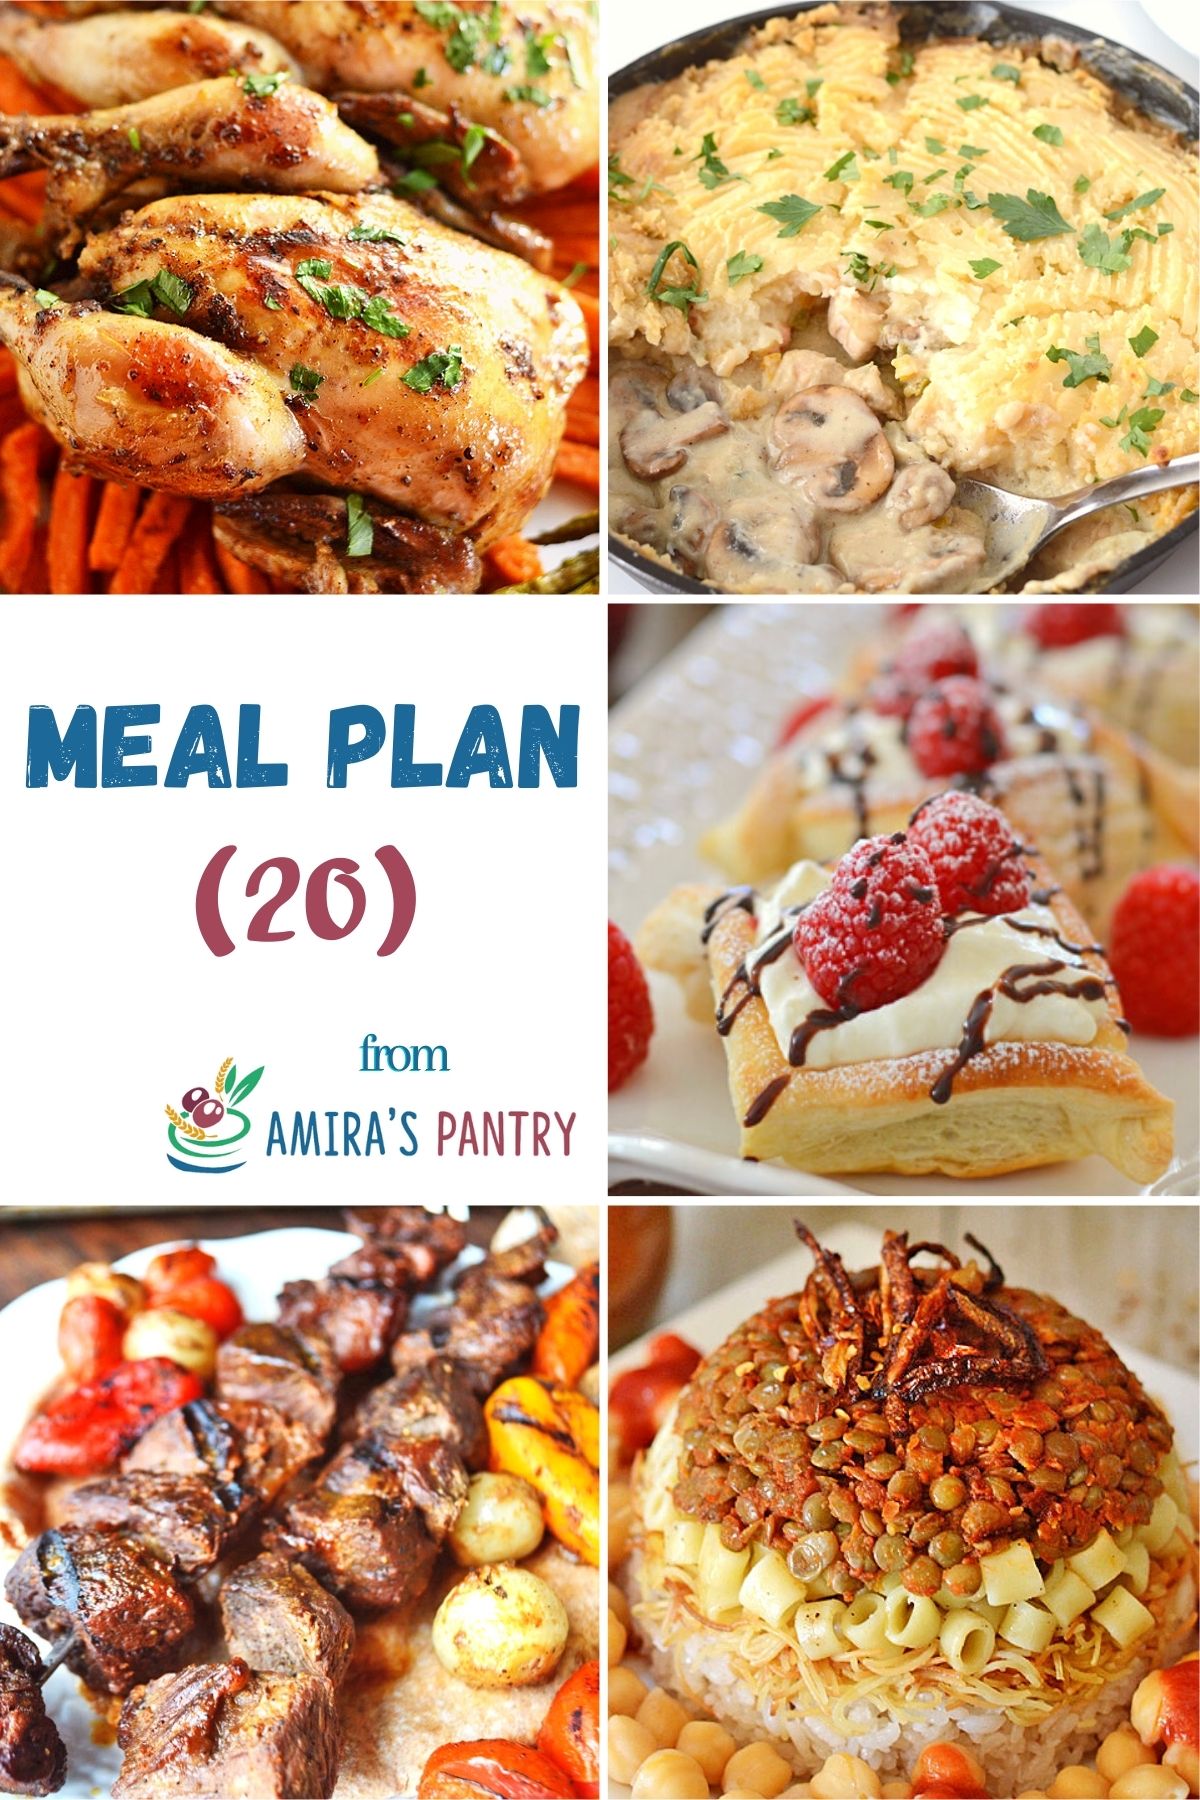 A collage of images from this week's meal plan recipe.